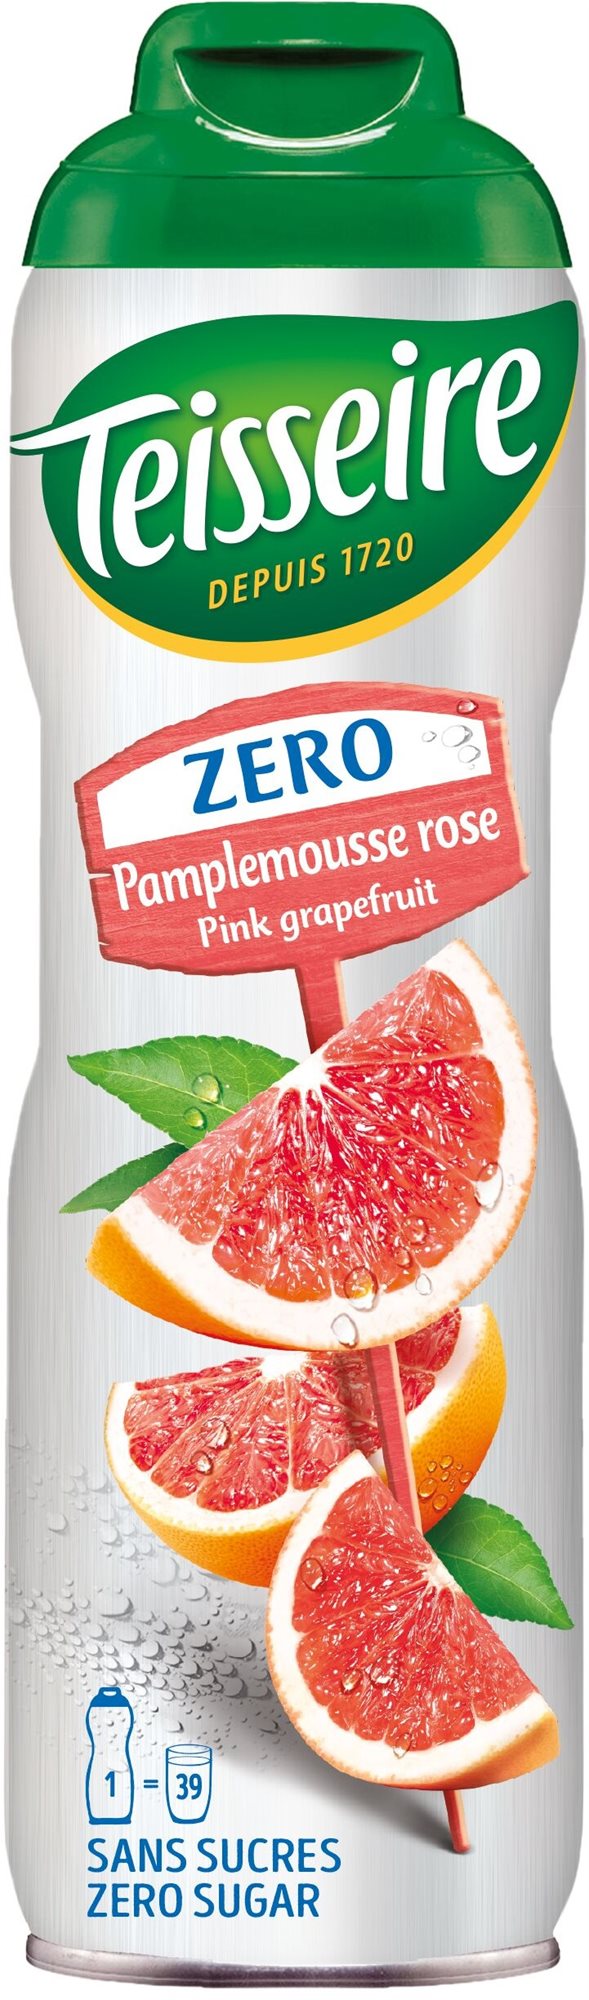 Teisseire pink grapefruit 0,6 l 0%